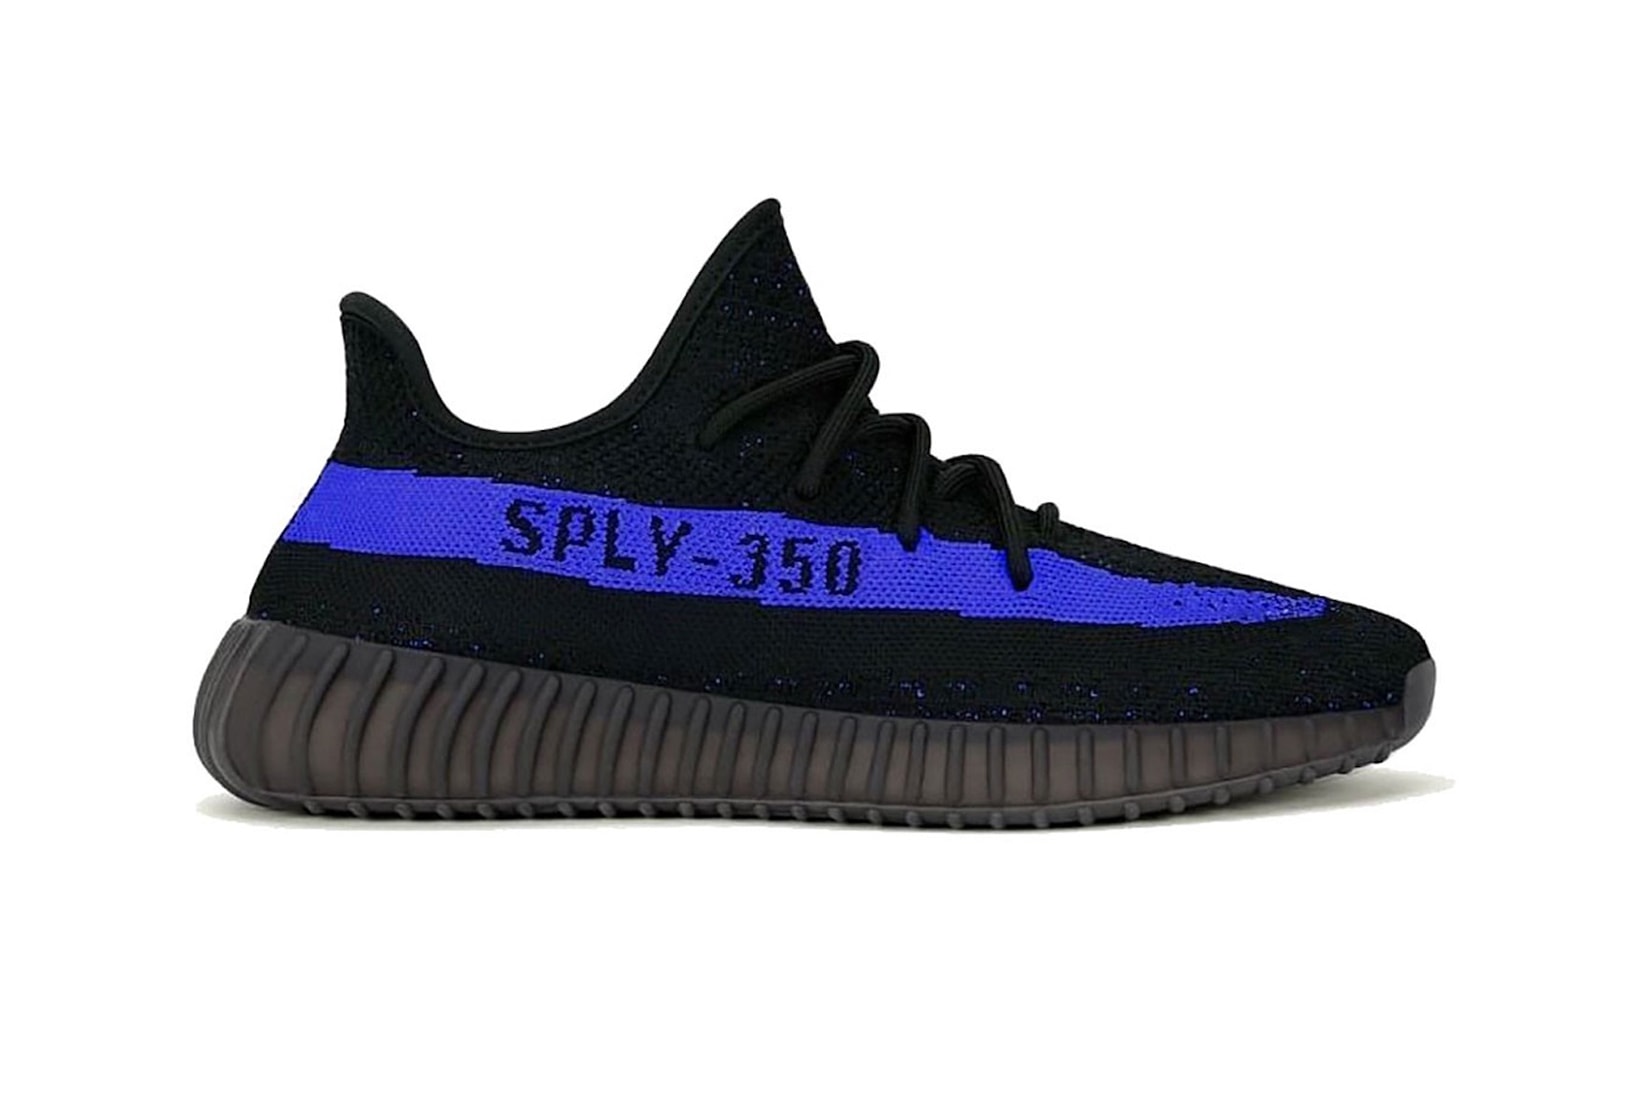 adidas YEEZY BOOST 350 V2 Dazzling Blue Kanye West Sneakers Footwear Shoes Kicks Black Lateral